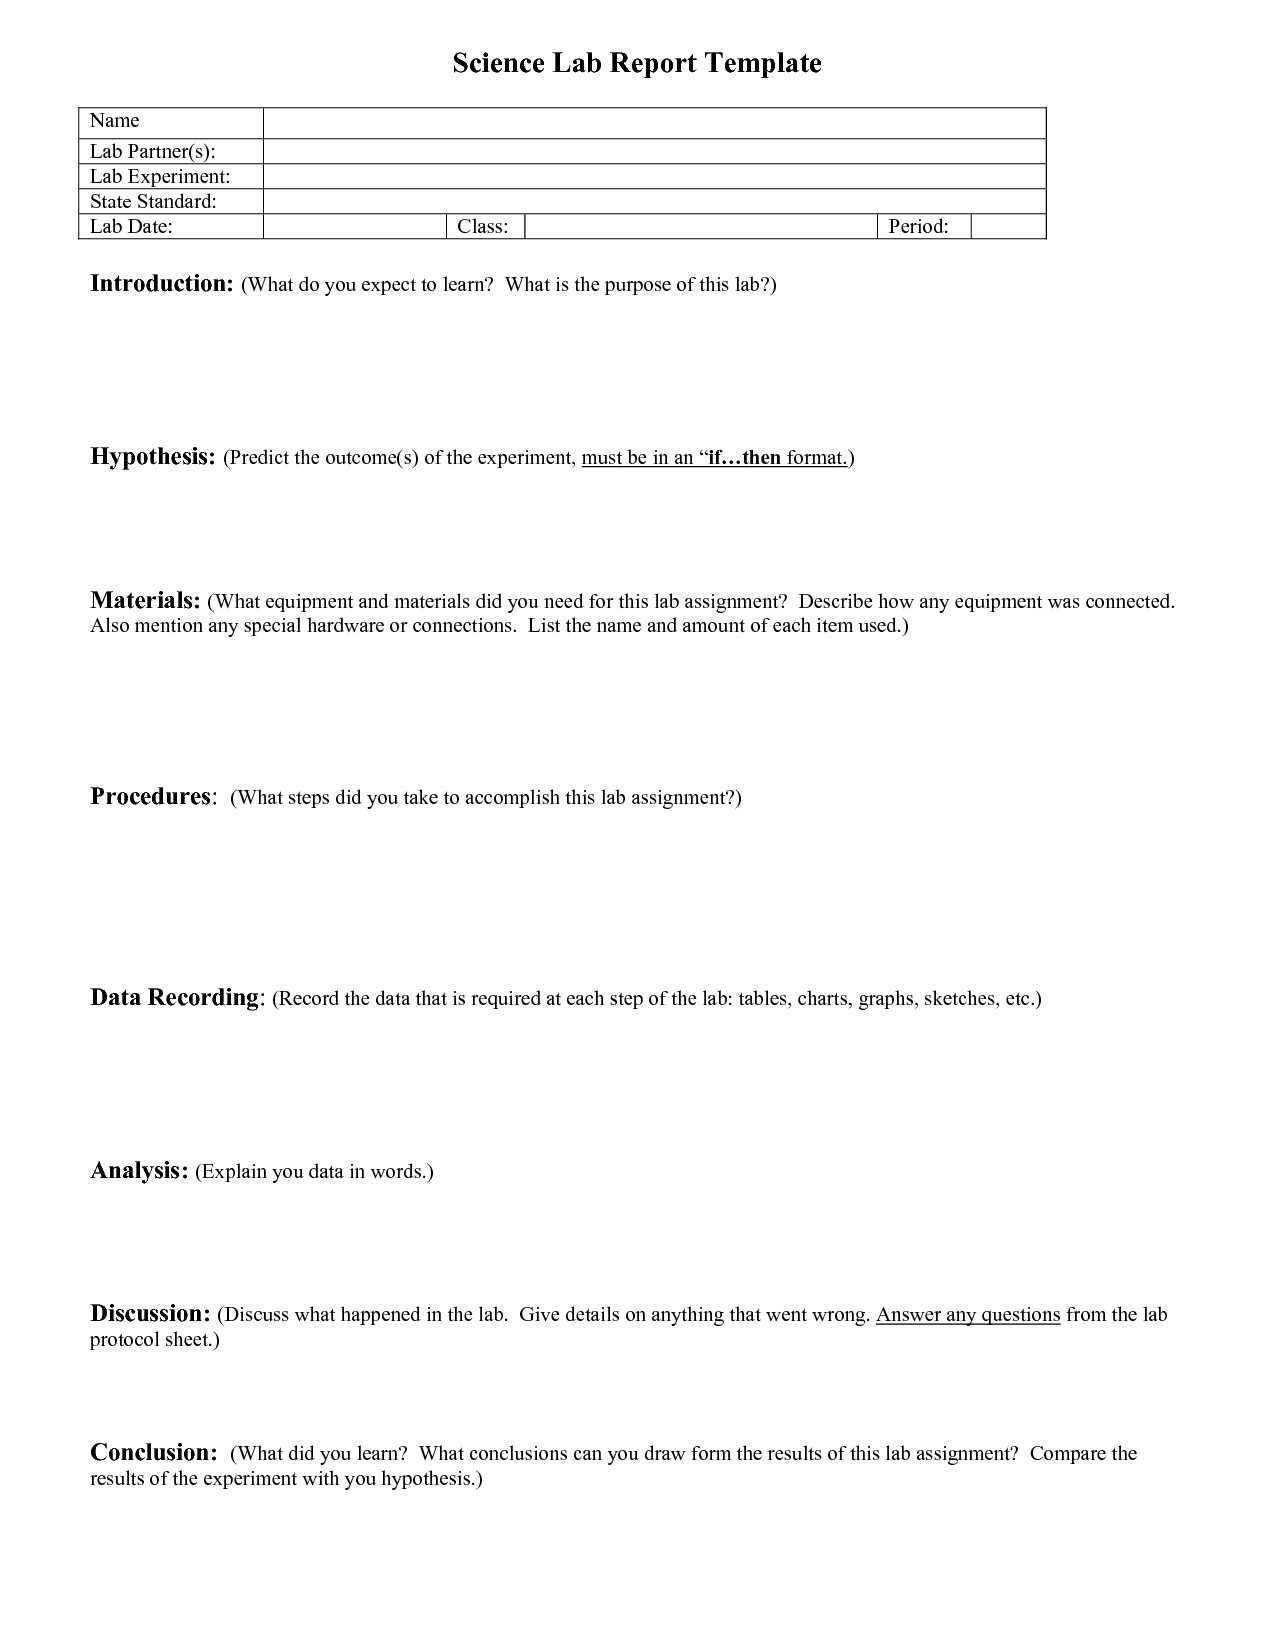 Experimental Design Worksheet Scientific Method as Well as Scientific Method Practice Worksheet Answers Image Collections